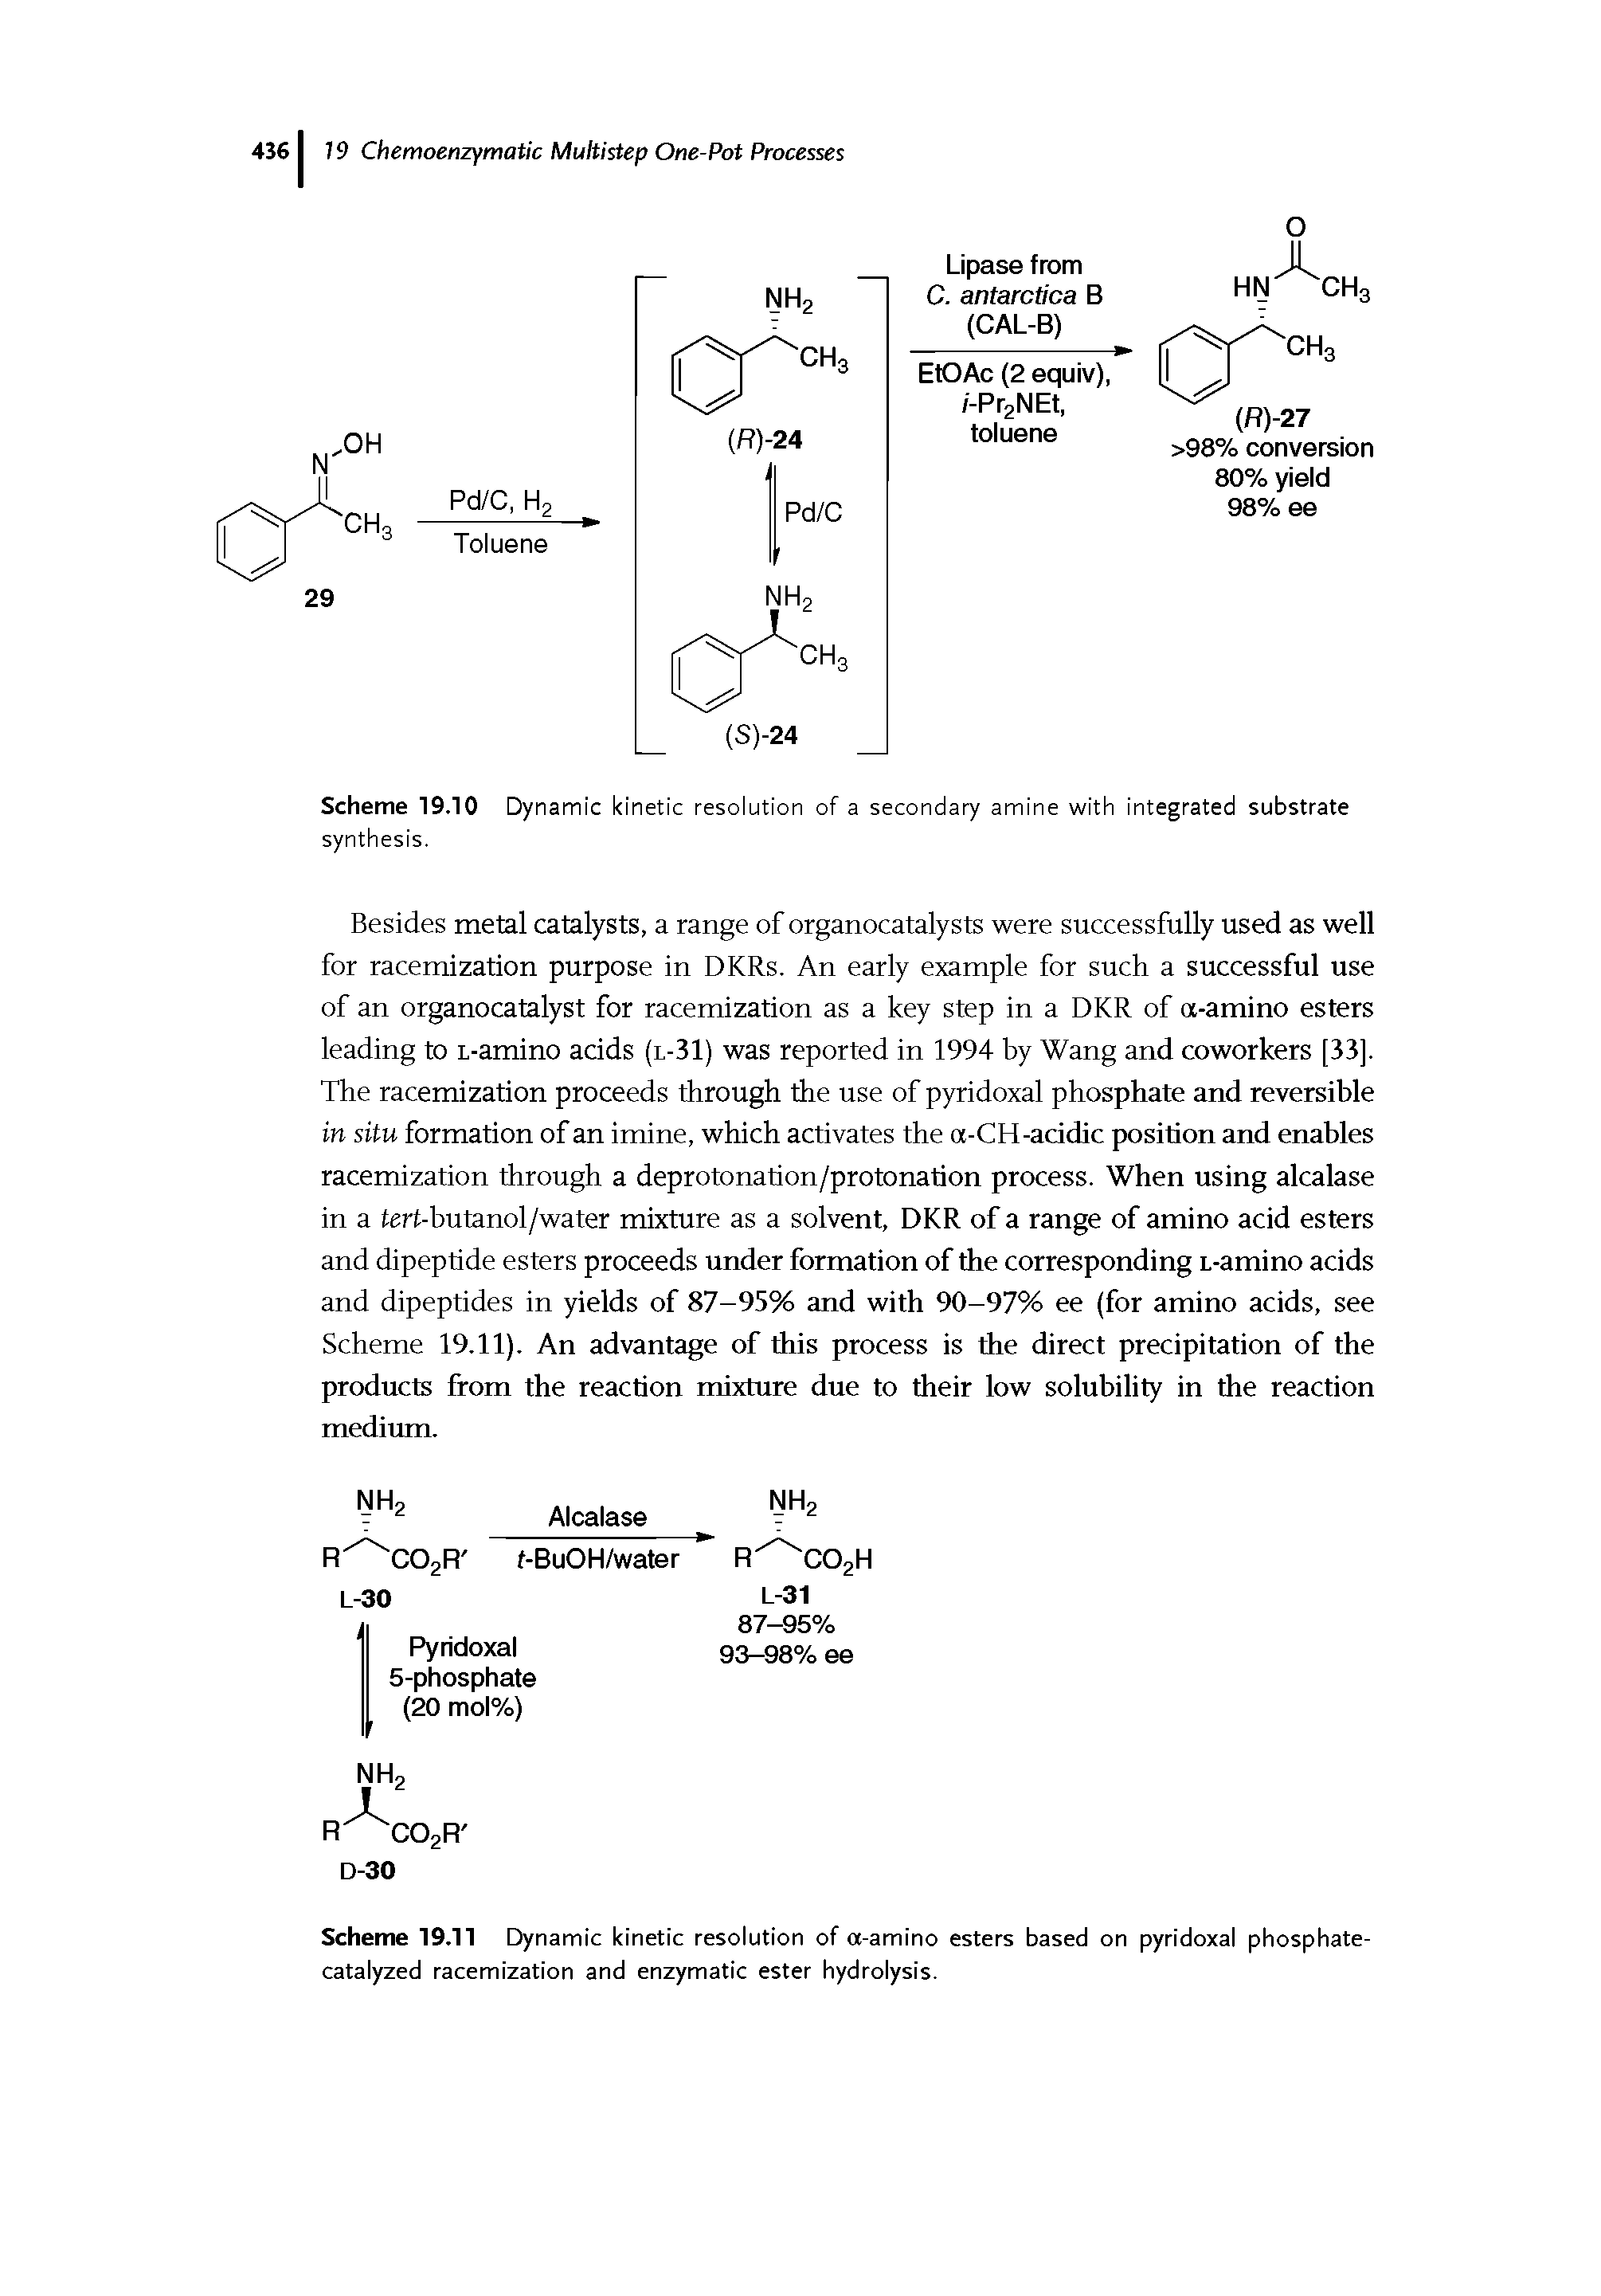 Scheme 19.11 Dynamic kinetic resolution of a-amino esters based on pyridoxal phosphate-catalyzed racemization and enzymatic ester hydrolysis.